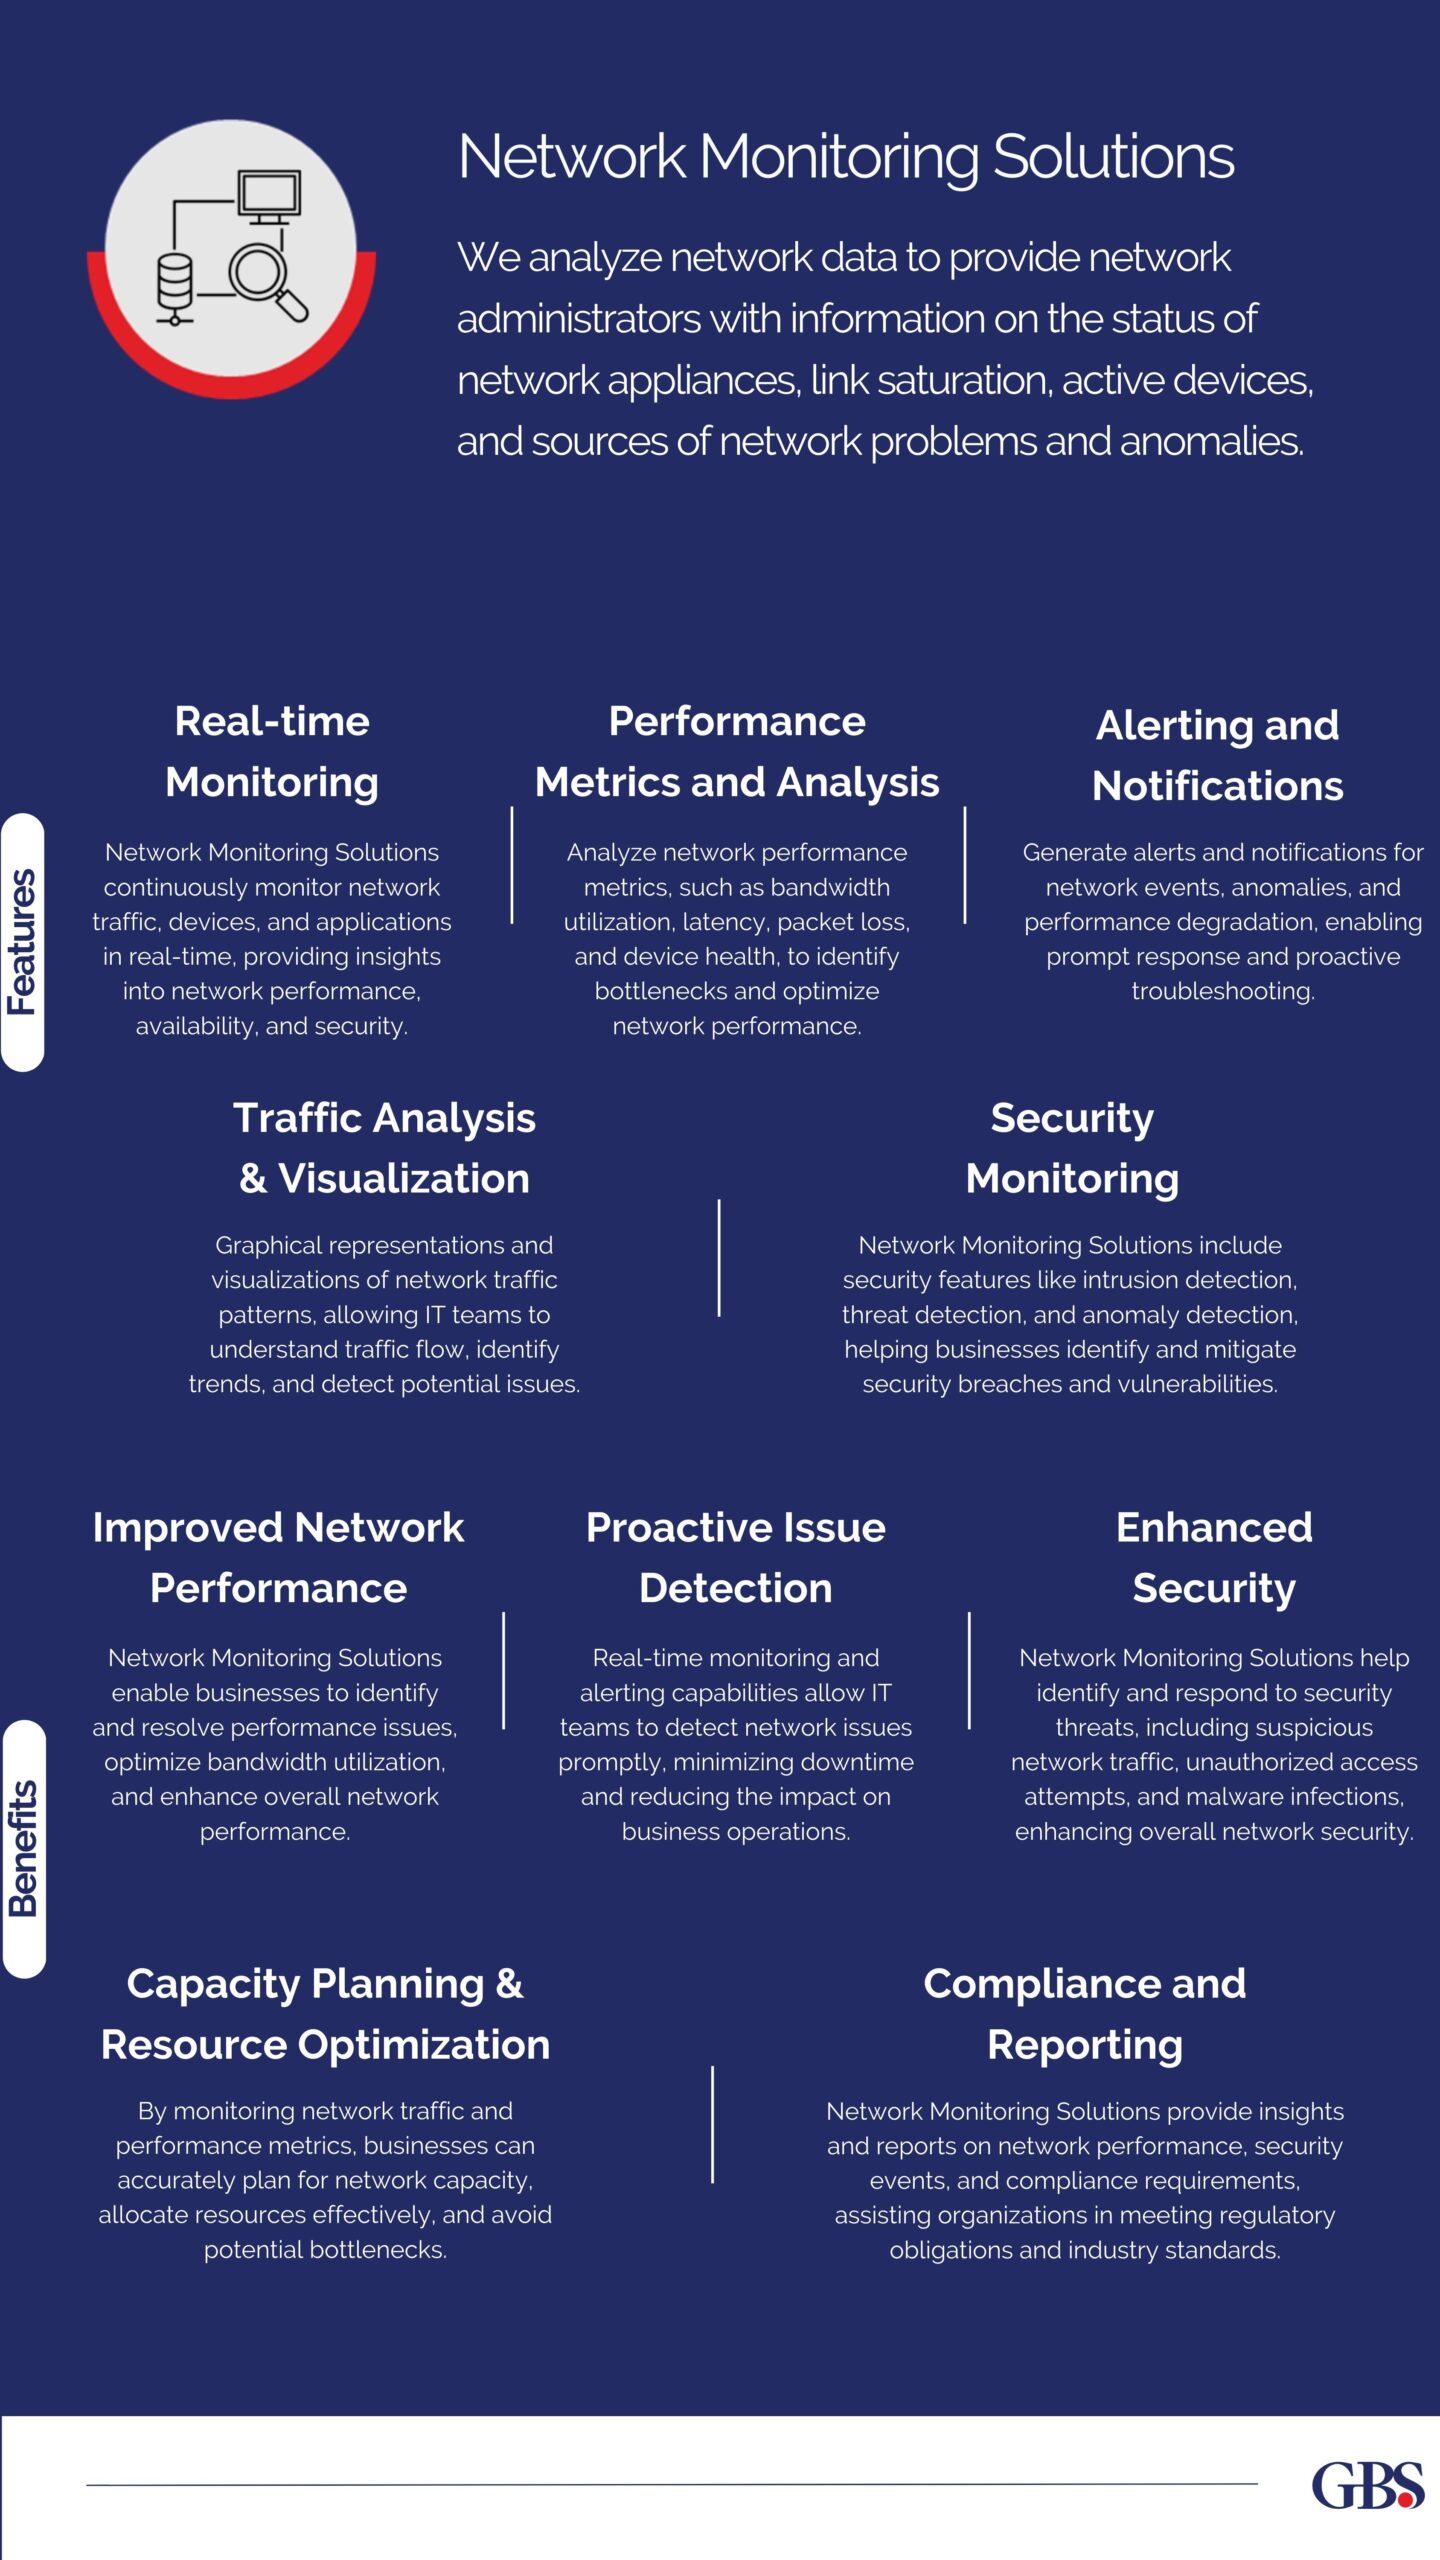 Pop-up Network Monitoring Solutions by Global Business Solutions Dubai